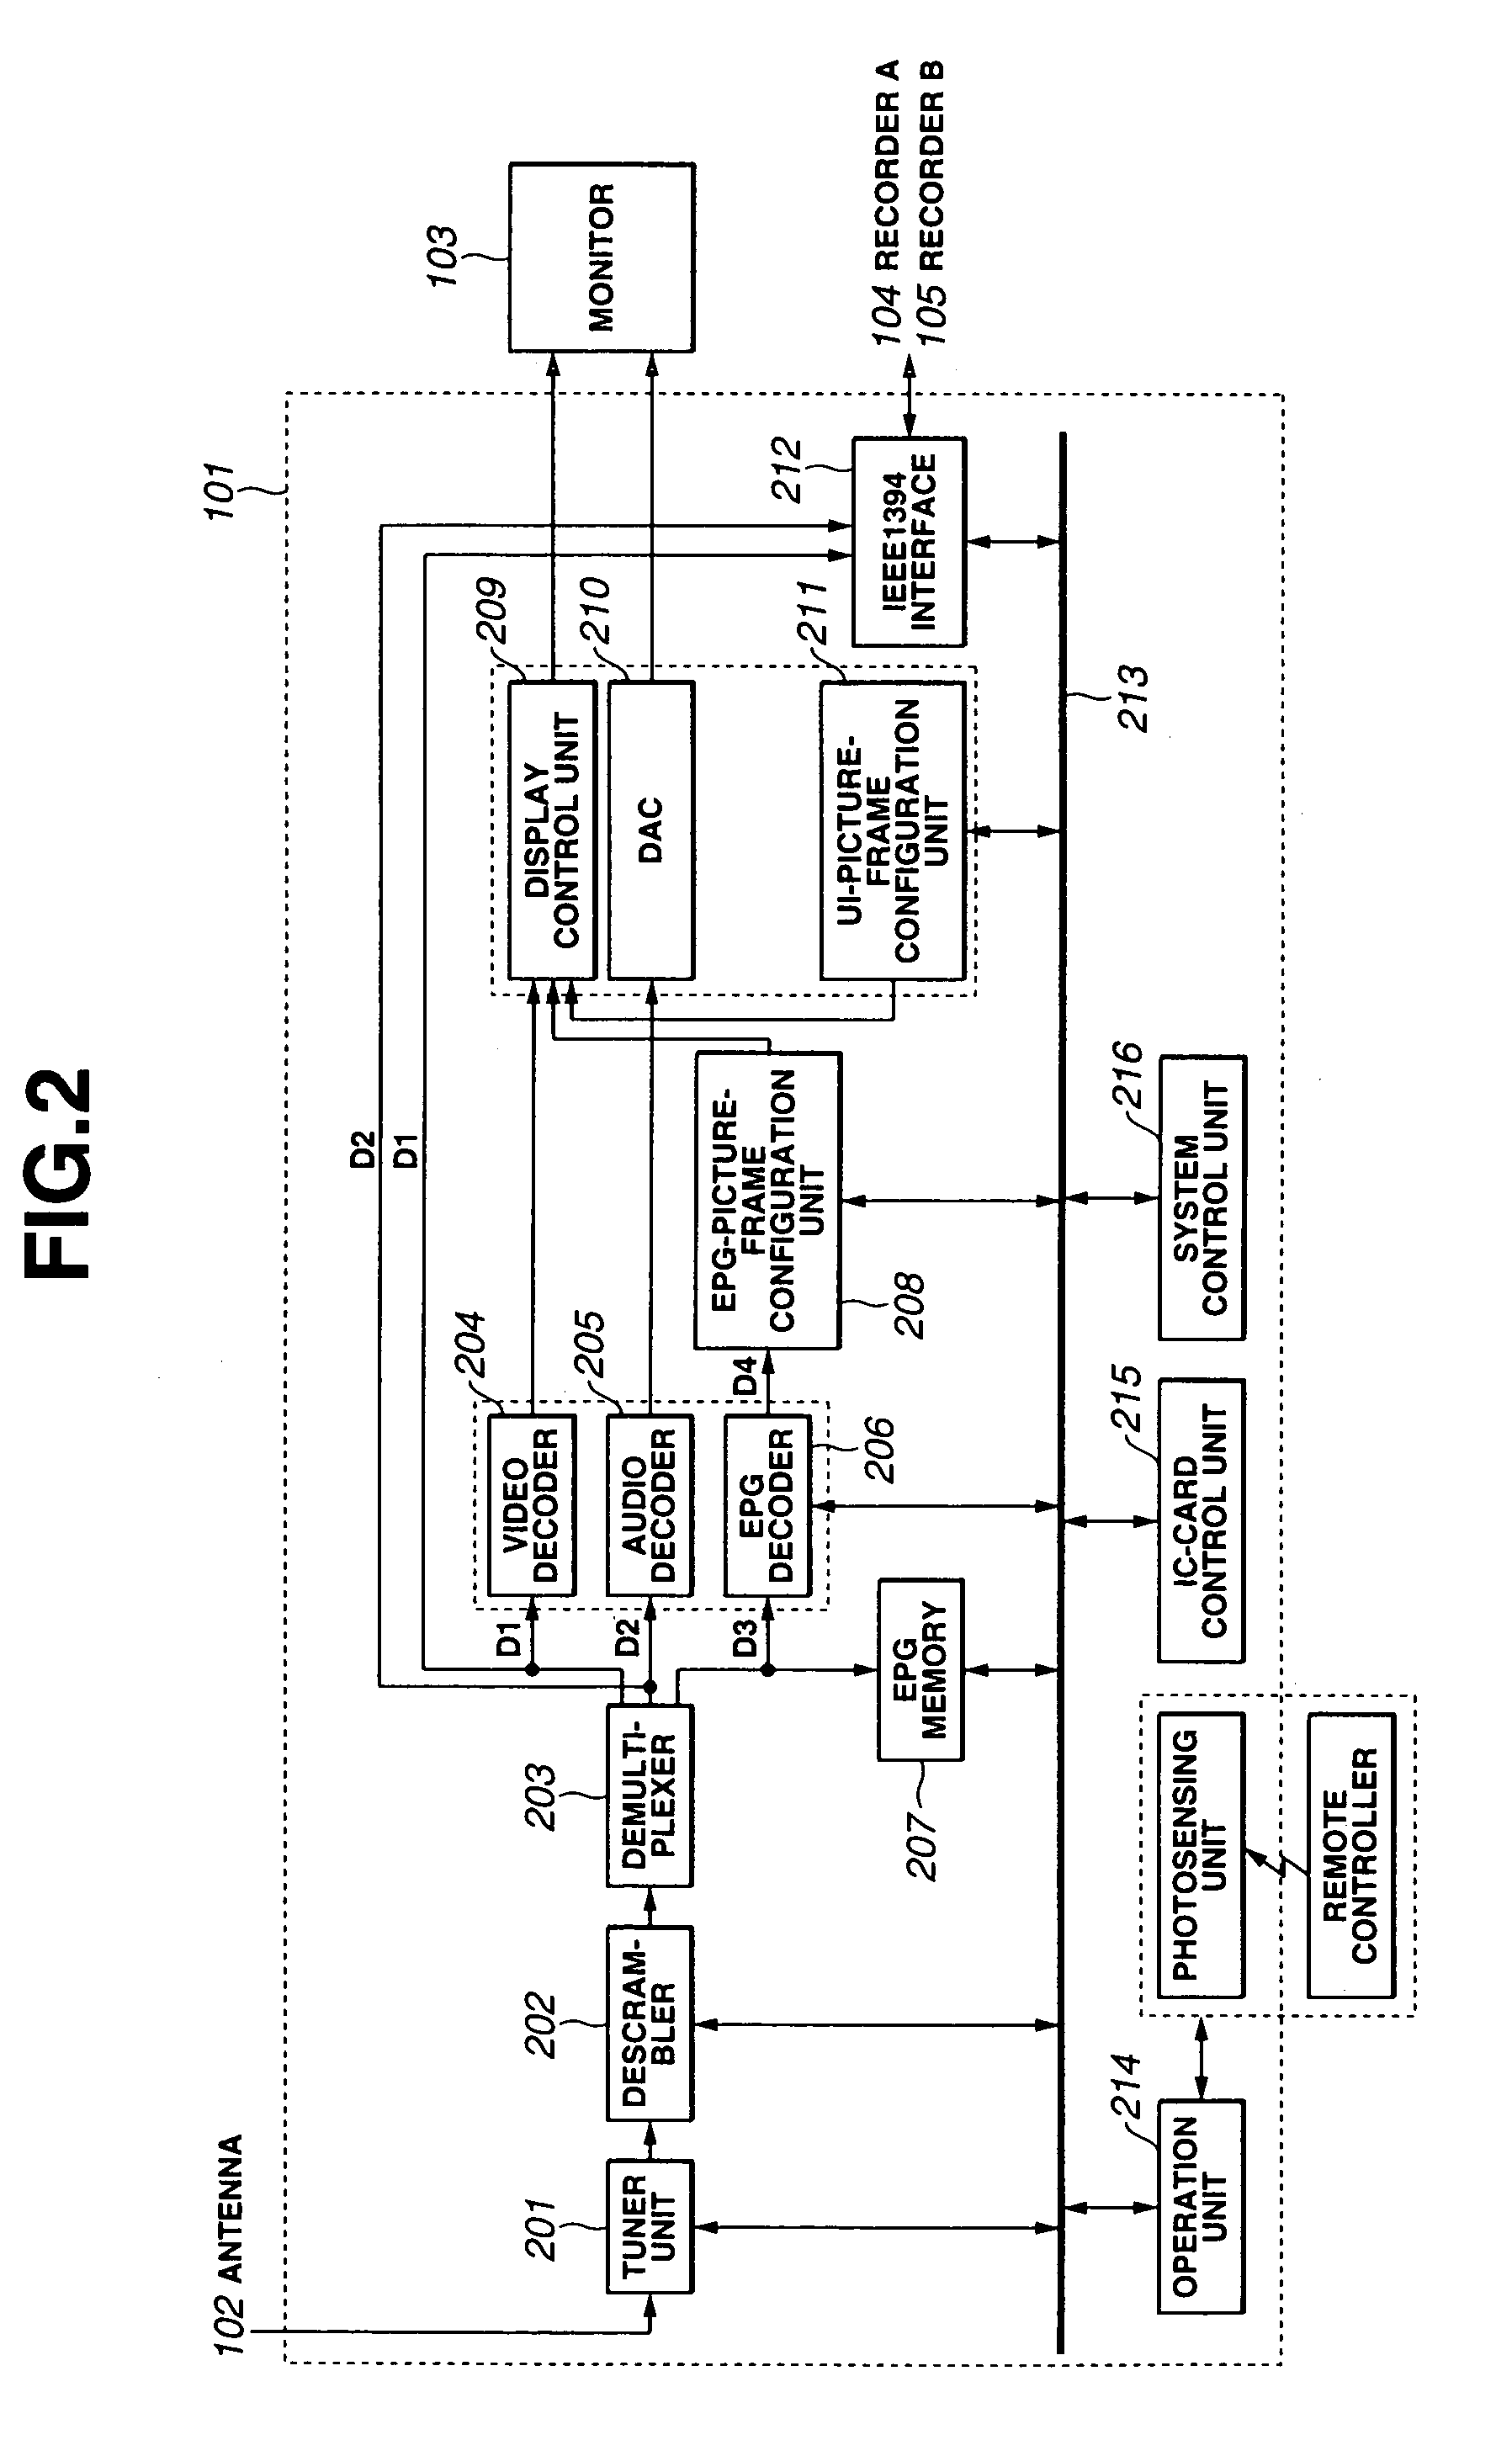 Television signal receiver, and method for controlling recording of television signals